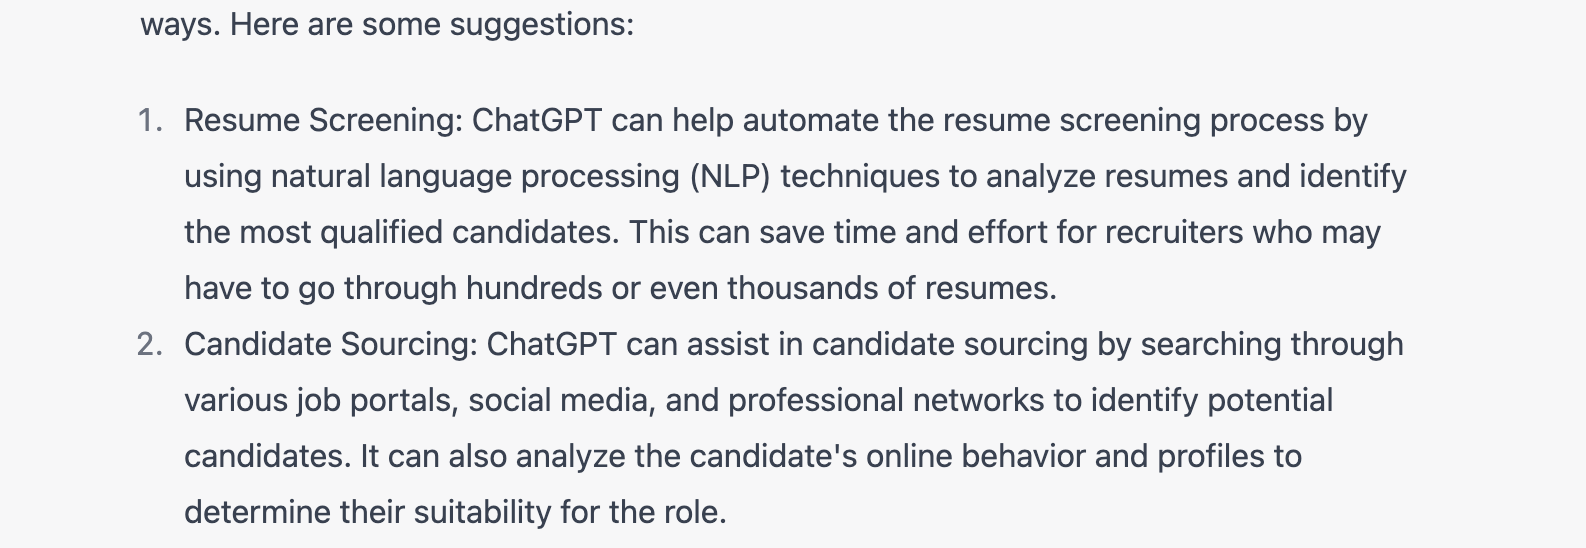 ChatGPT says it can perform Candidate Sourcing un recruiting processes